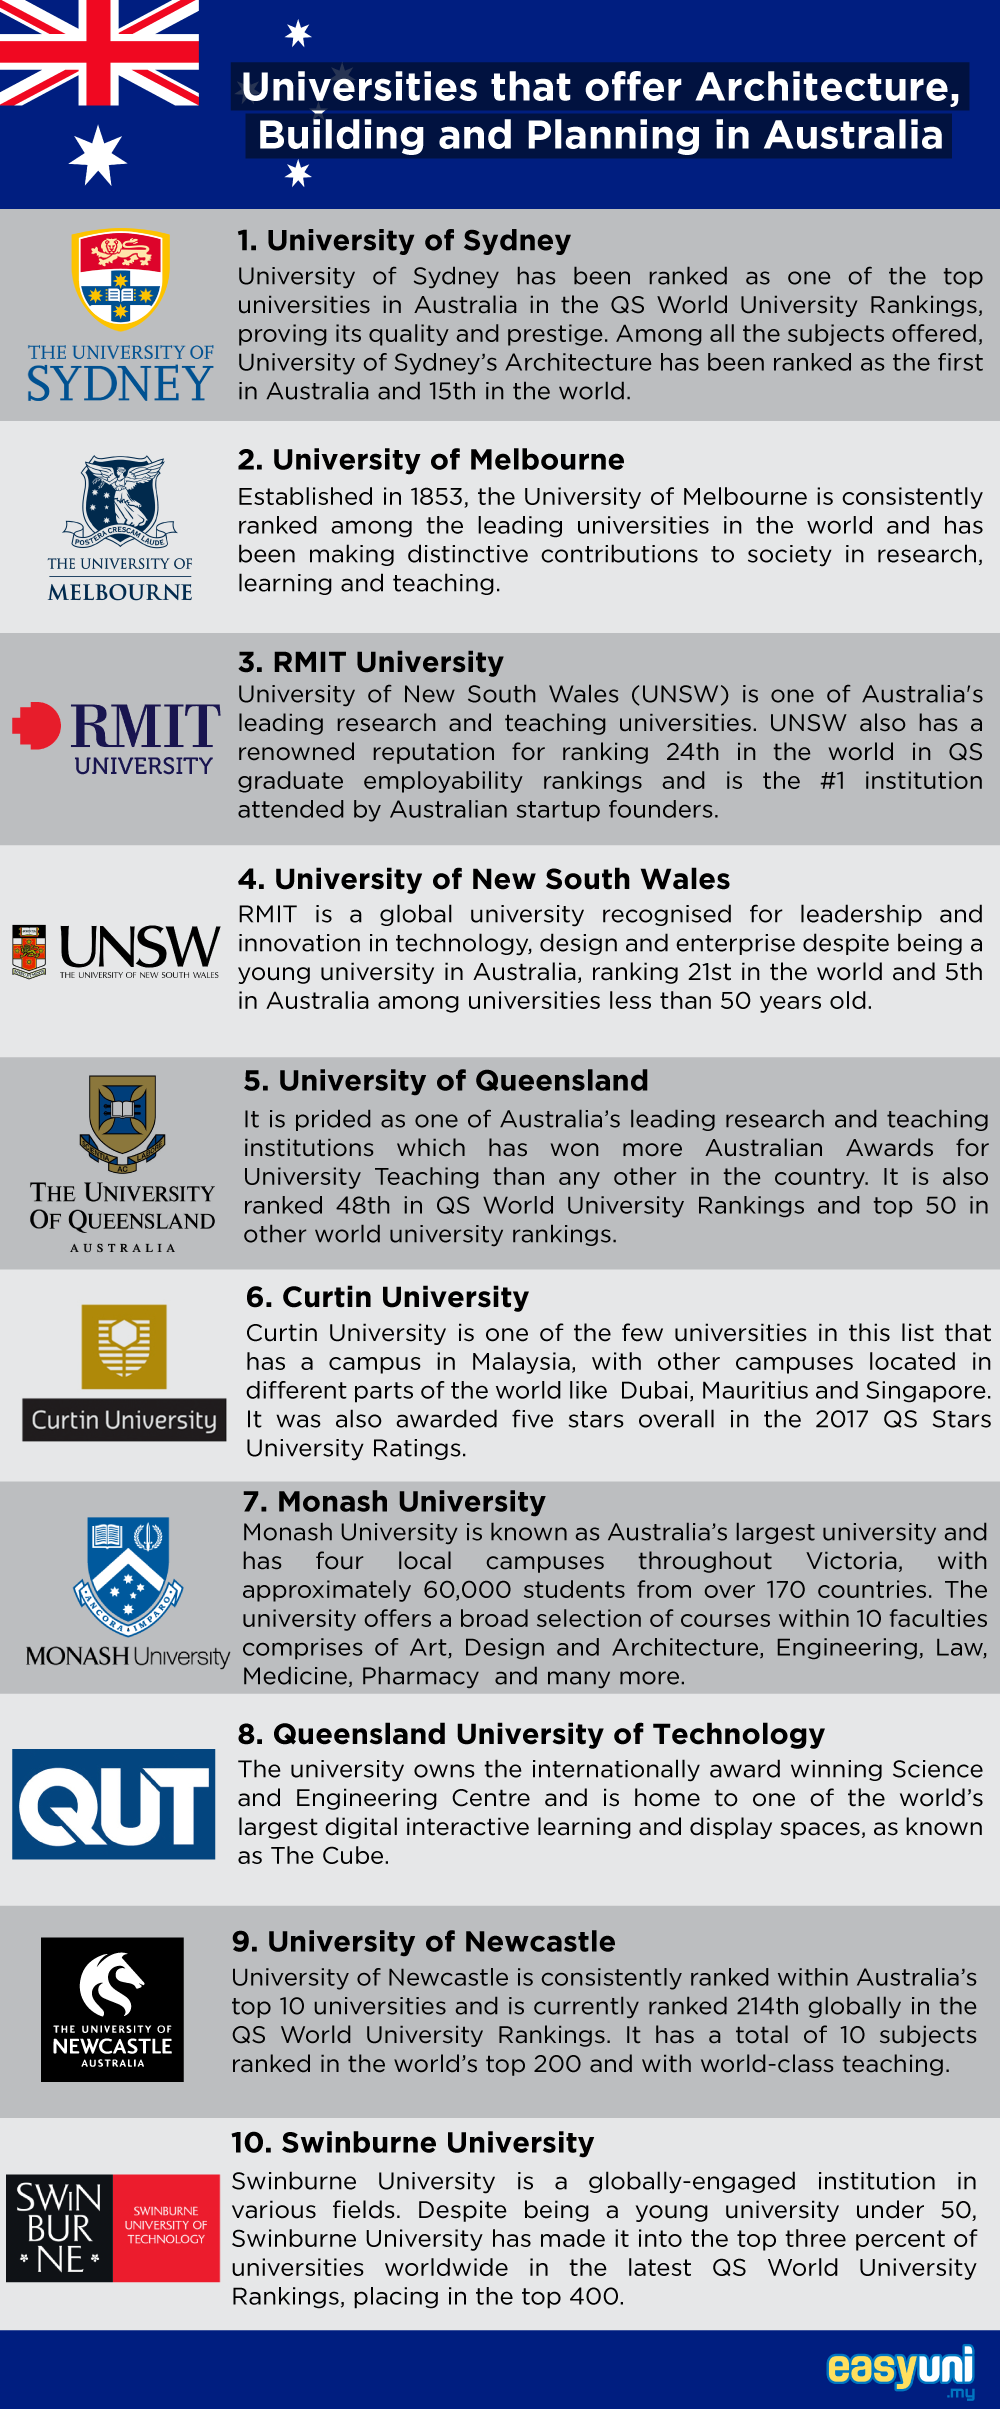 Universities that offer Architecture, Building and Planning in Australia Infographic